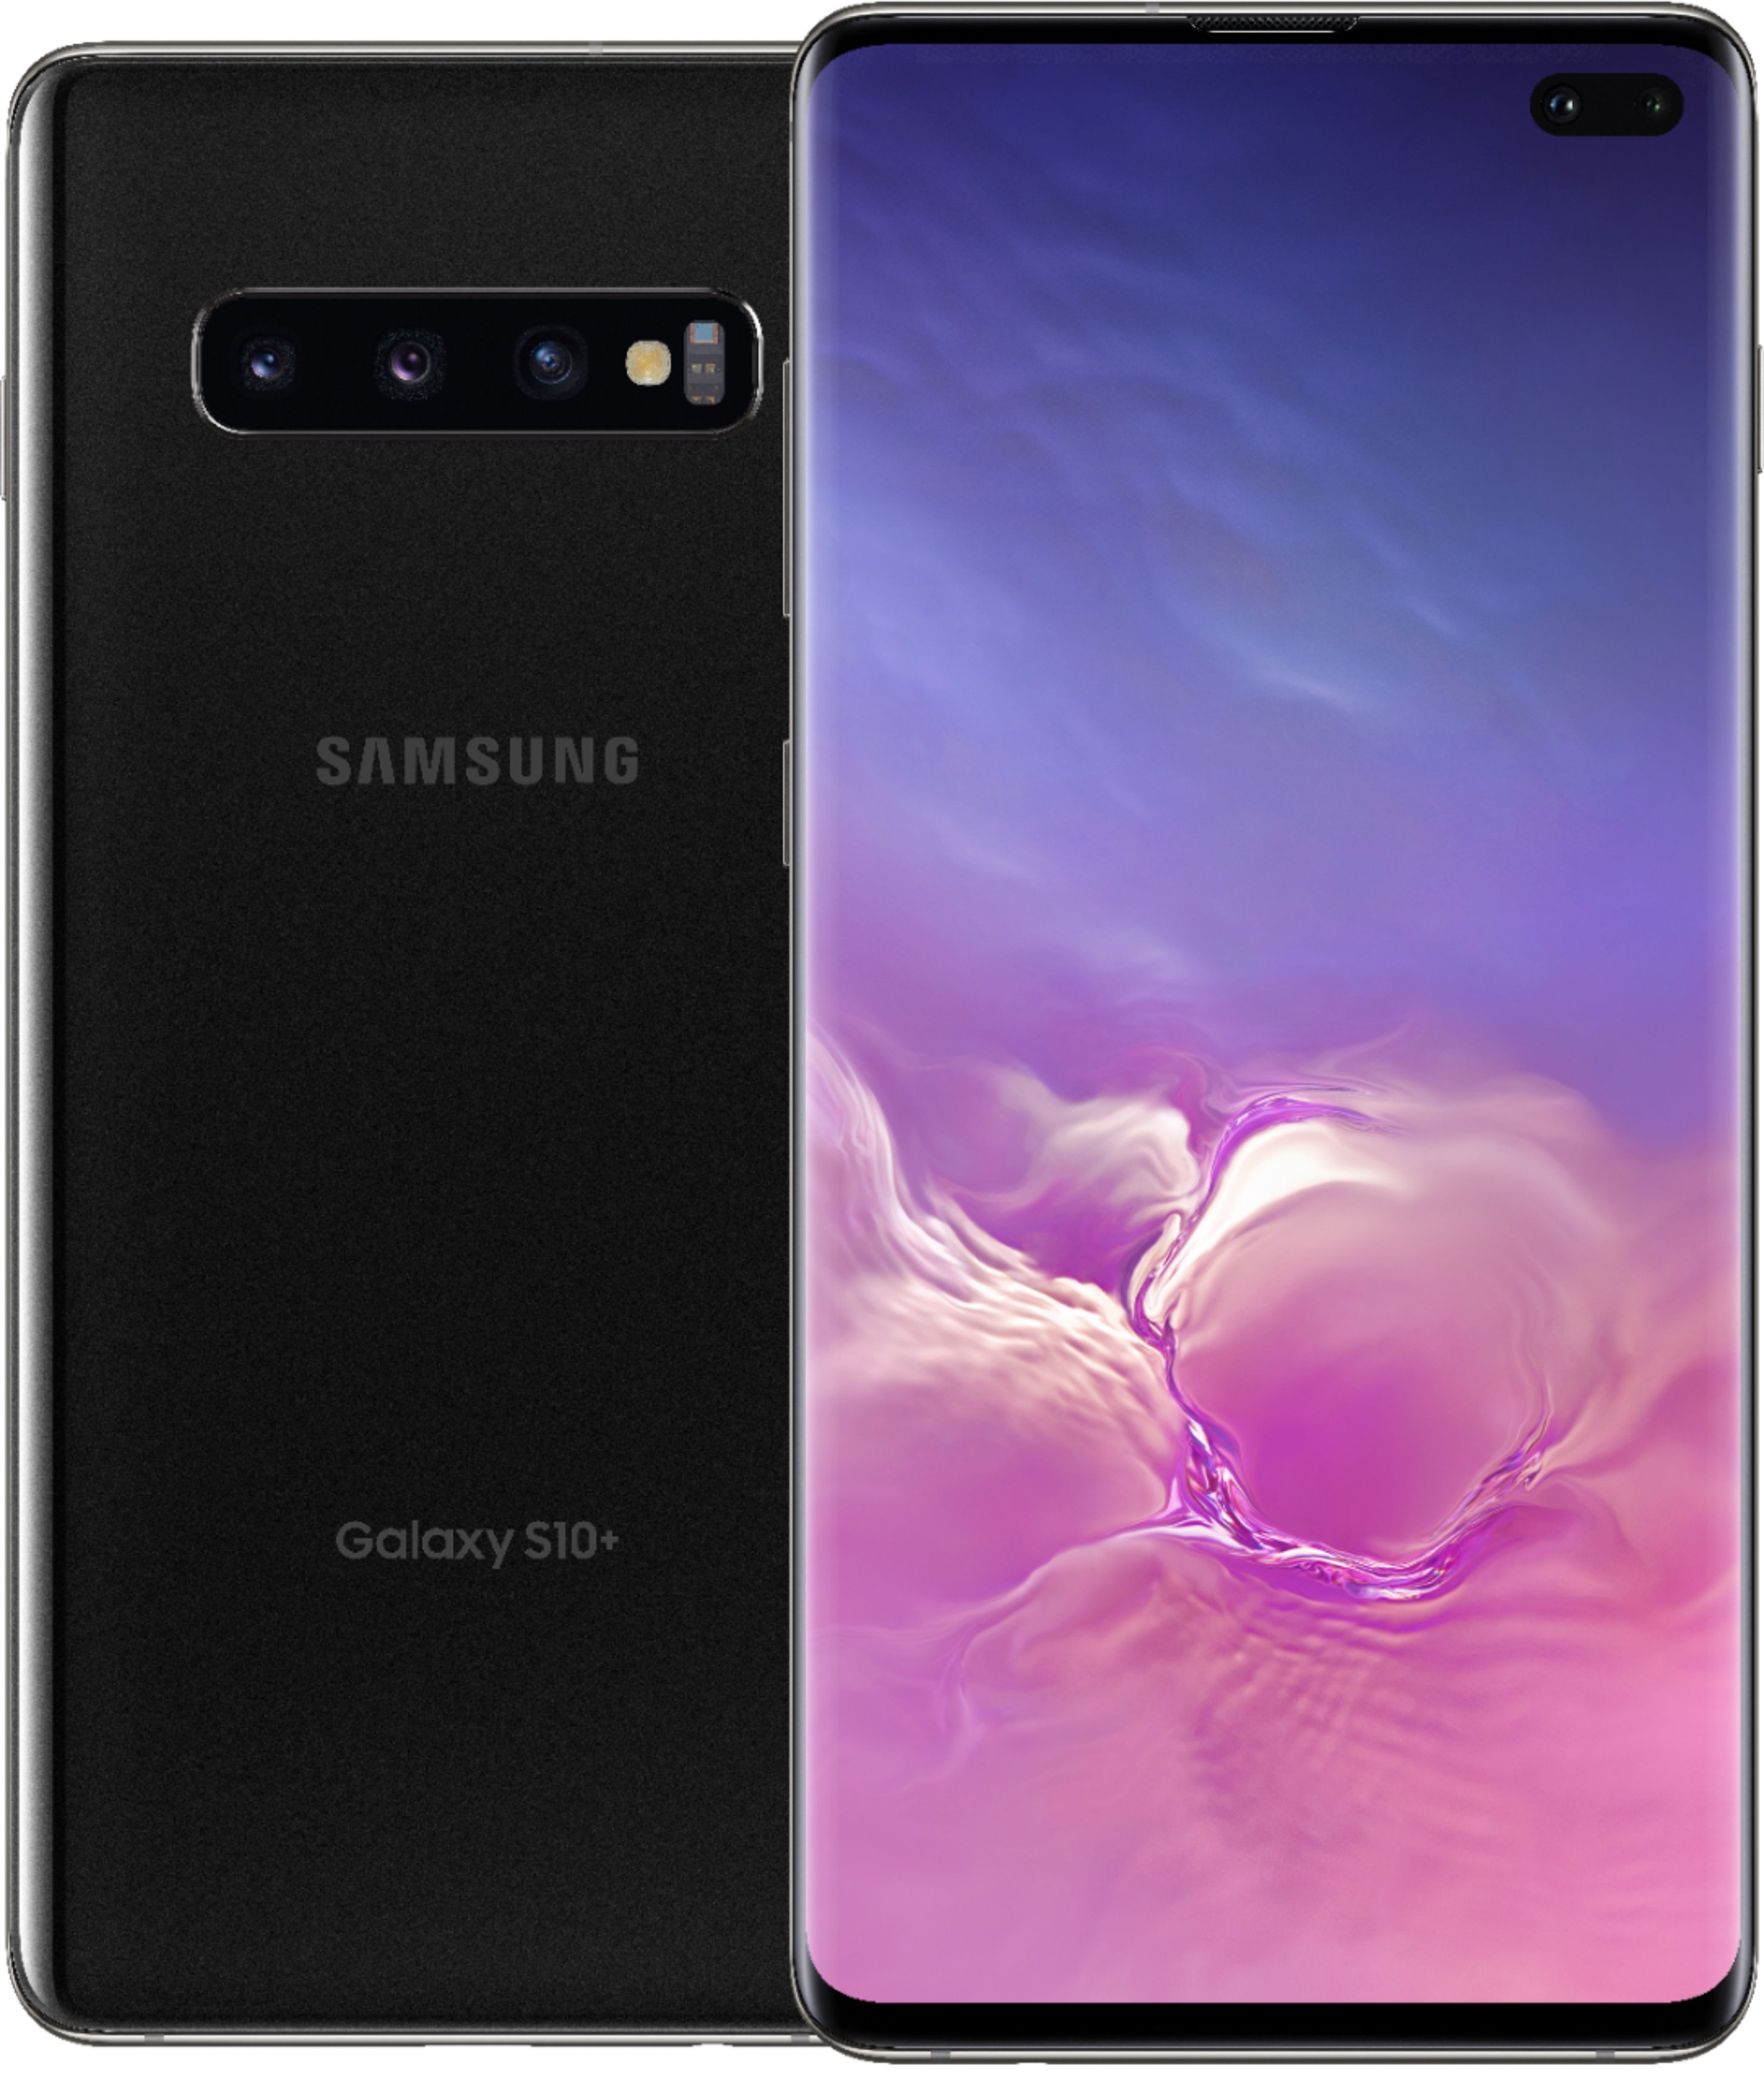 Samsung Galaxy S10 Plus review: Peak Samsung - Android Authority